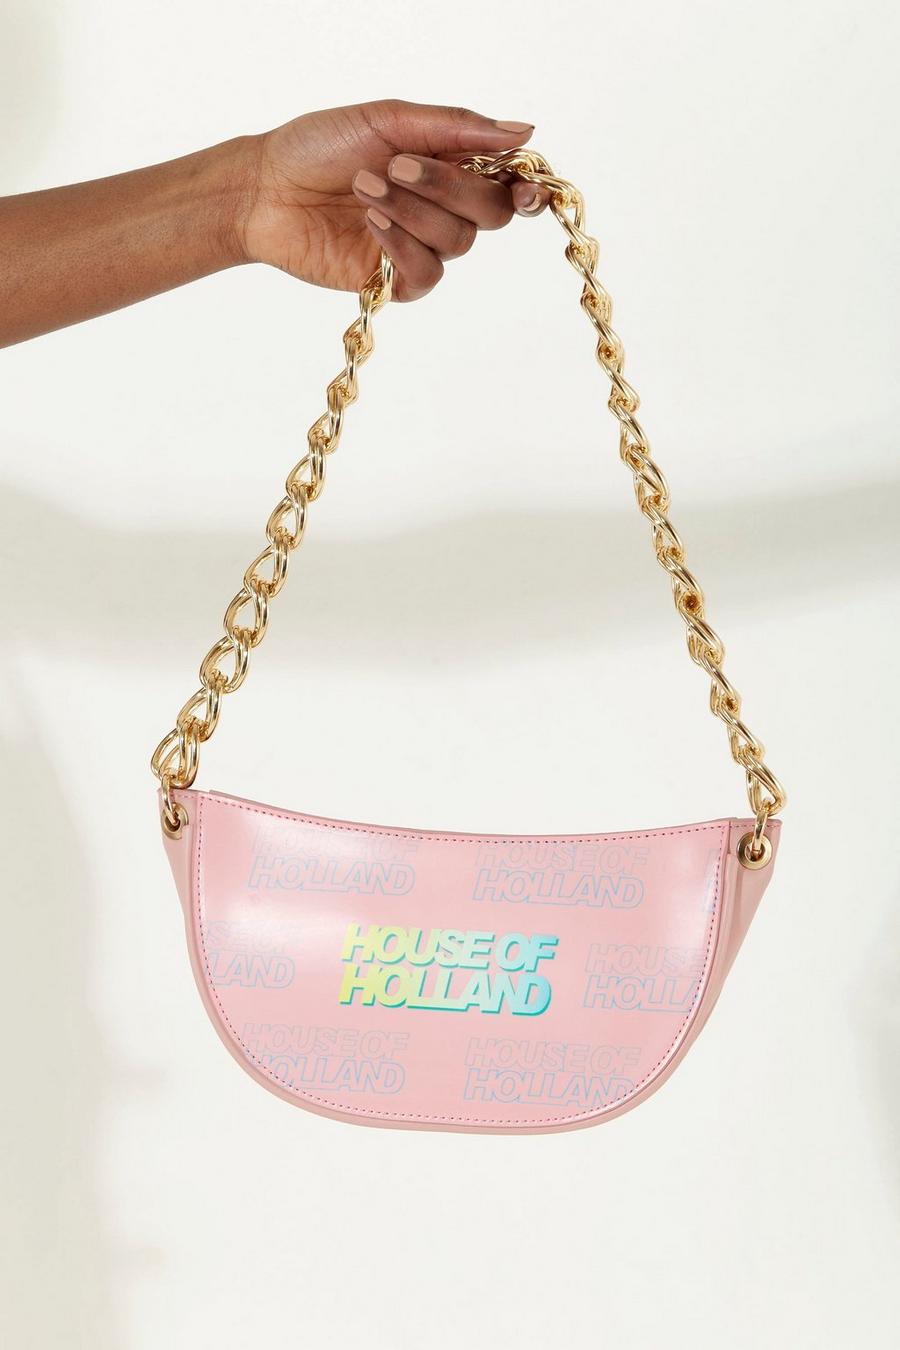 Shoulder Bag In Baby Pink With A Gold Chain Strap And Printed Logo